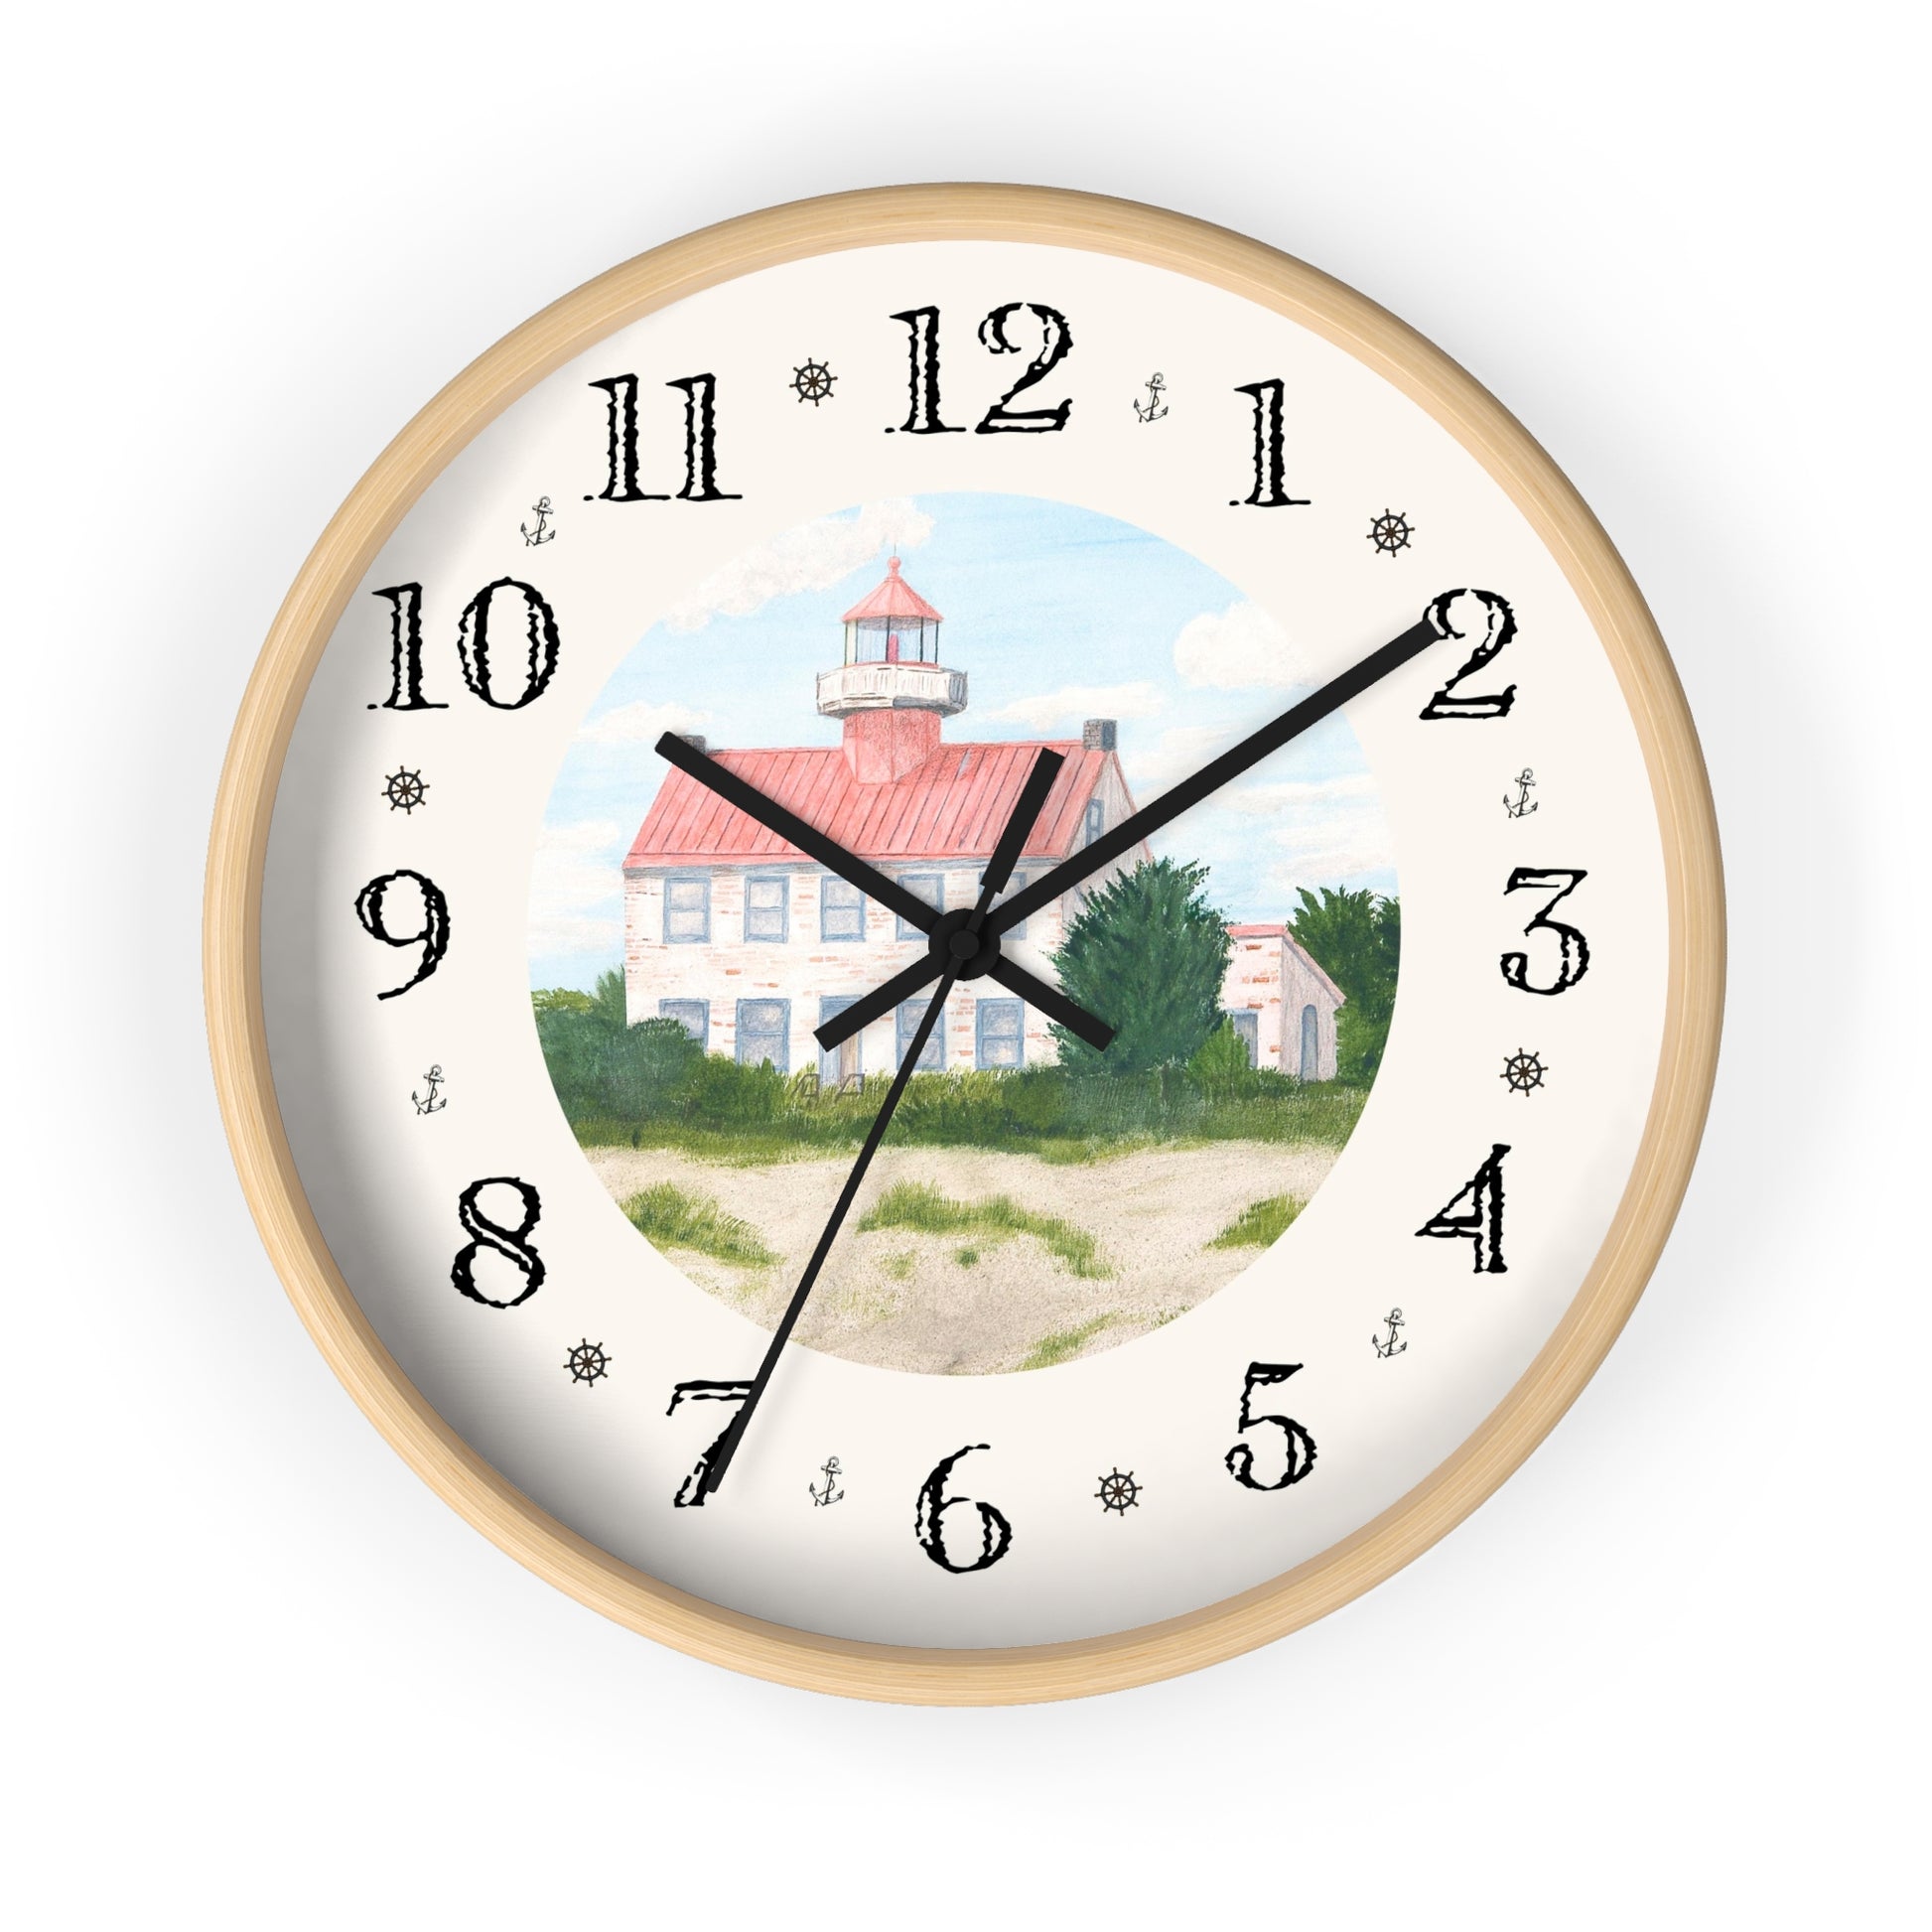 Enjoy a piece of New Jersey History as you look at the time on this charming clock. The East Point Lighthouse marks the entrance to the Maurice River from the Delaware Bay.